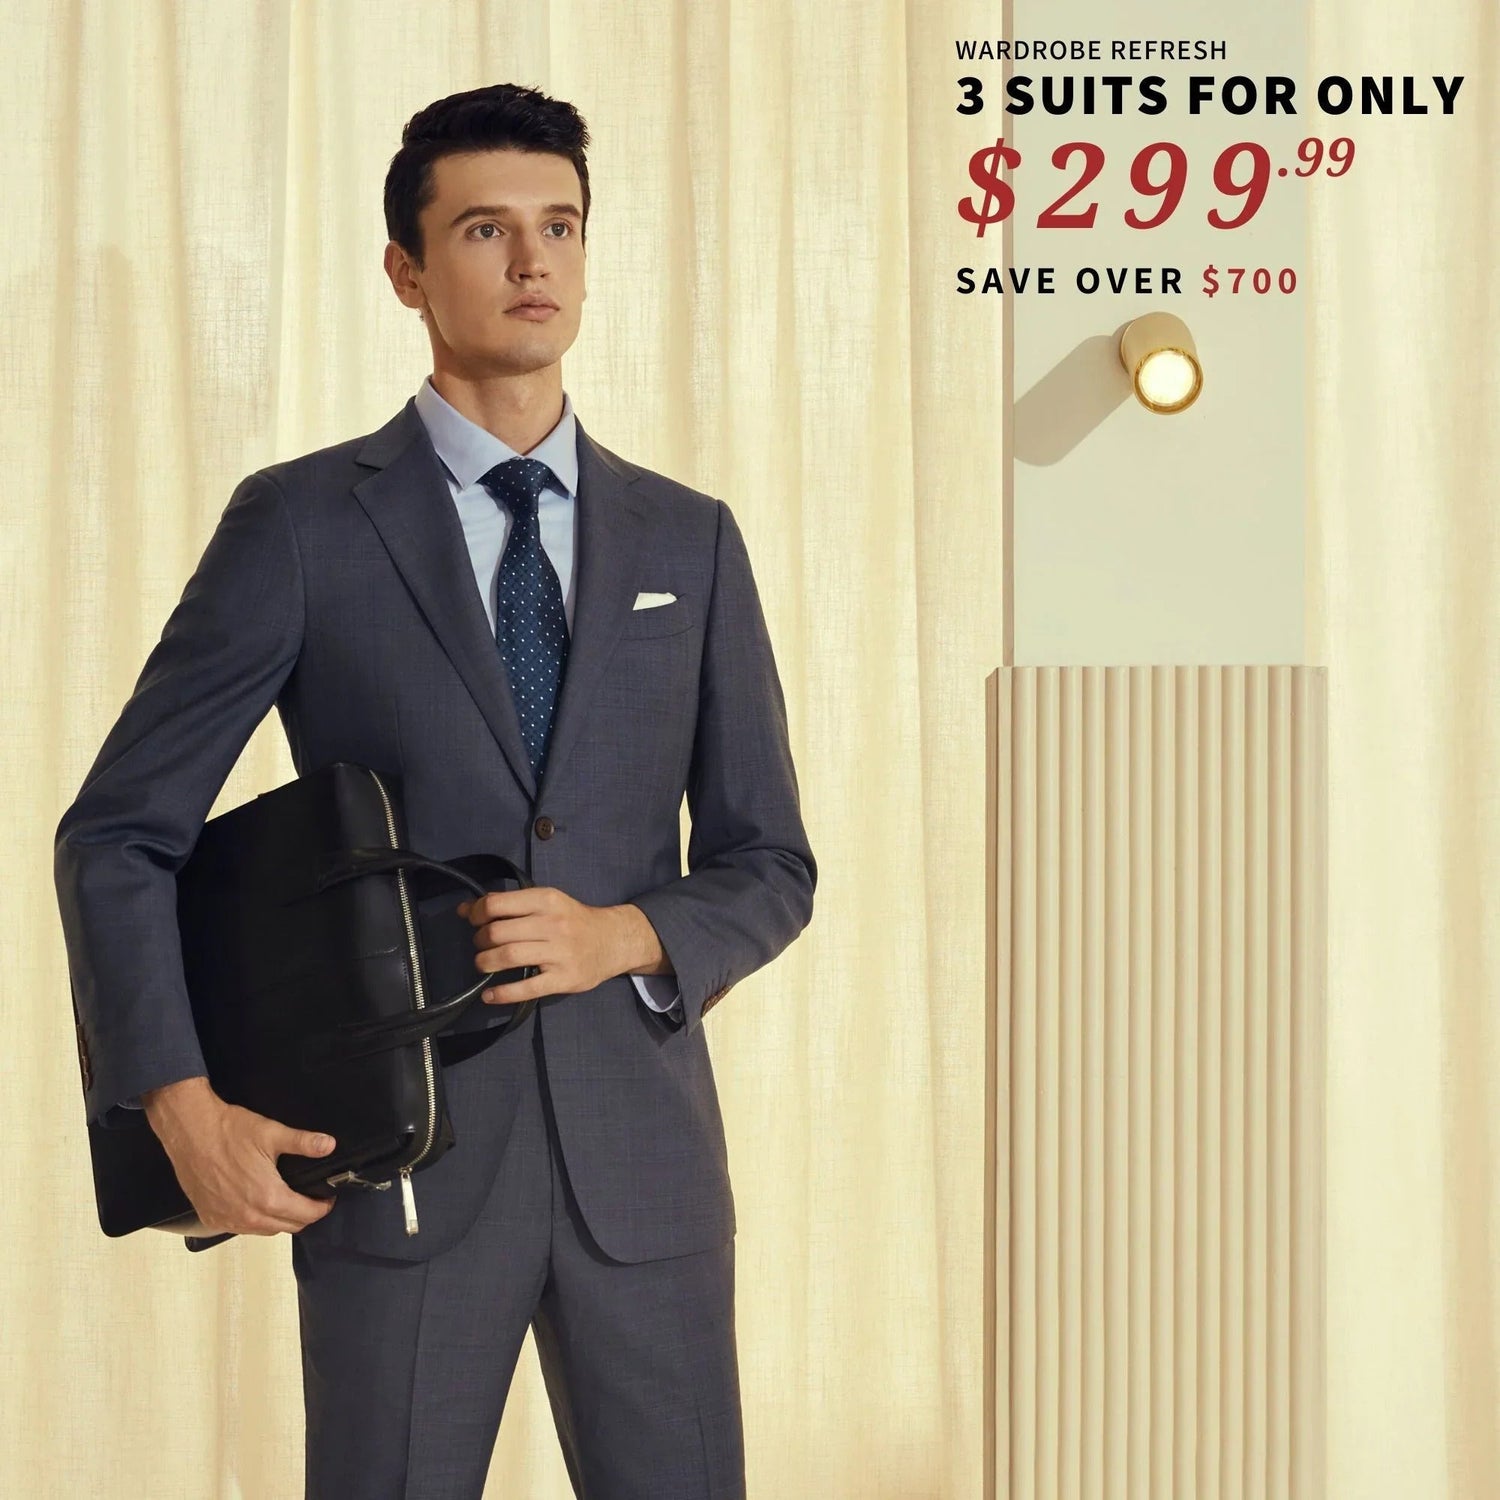 A man in a suit is holding a briefcase with unhemmed BYOB suits for $299.